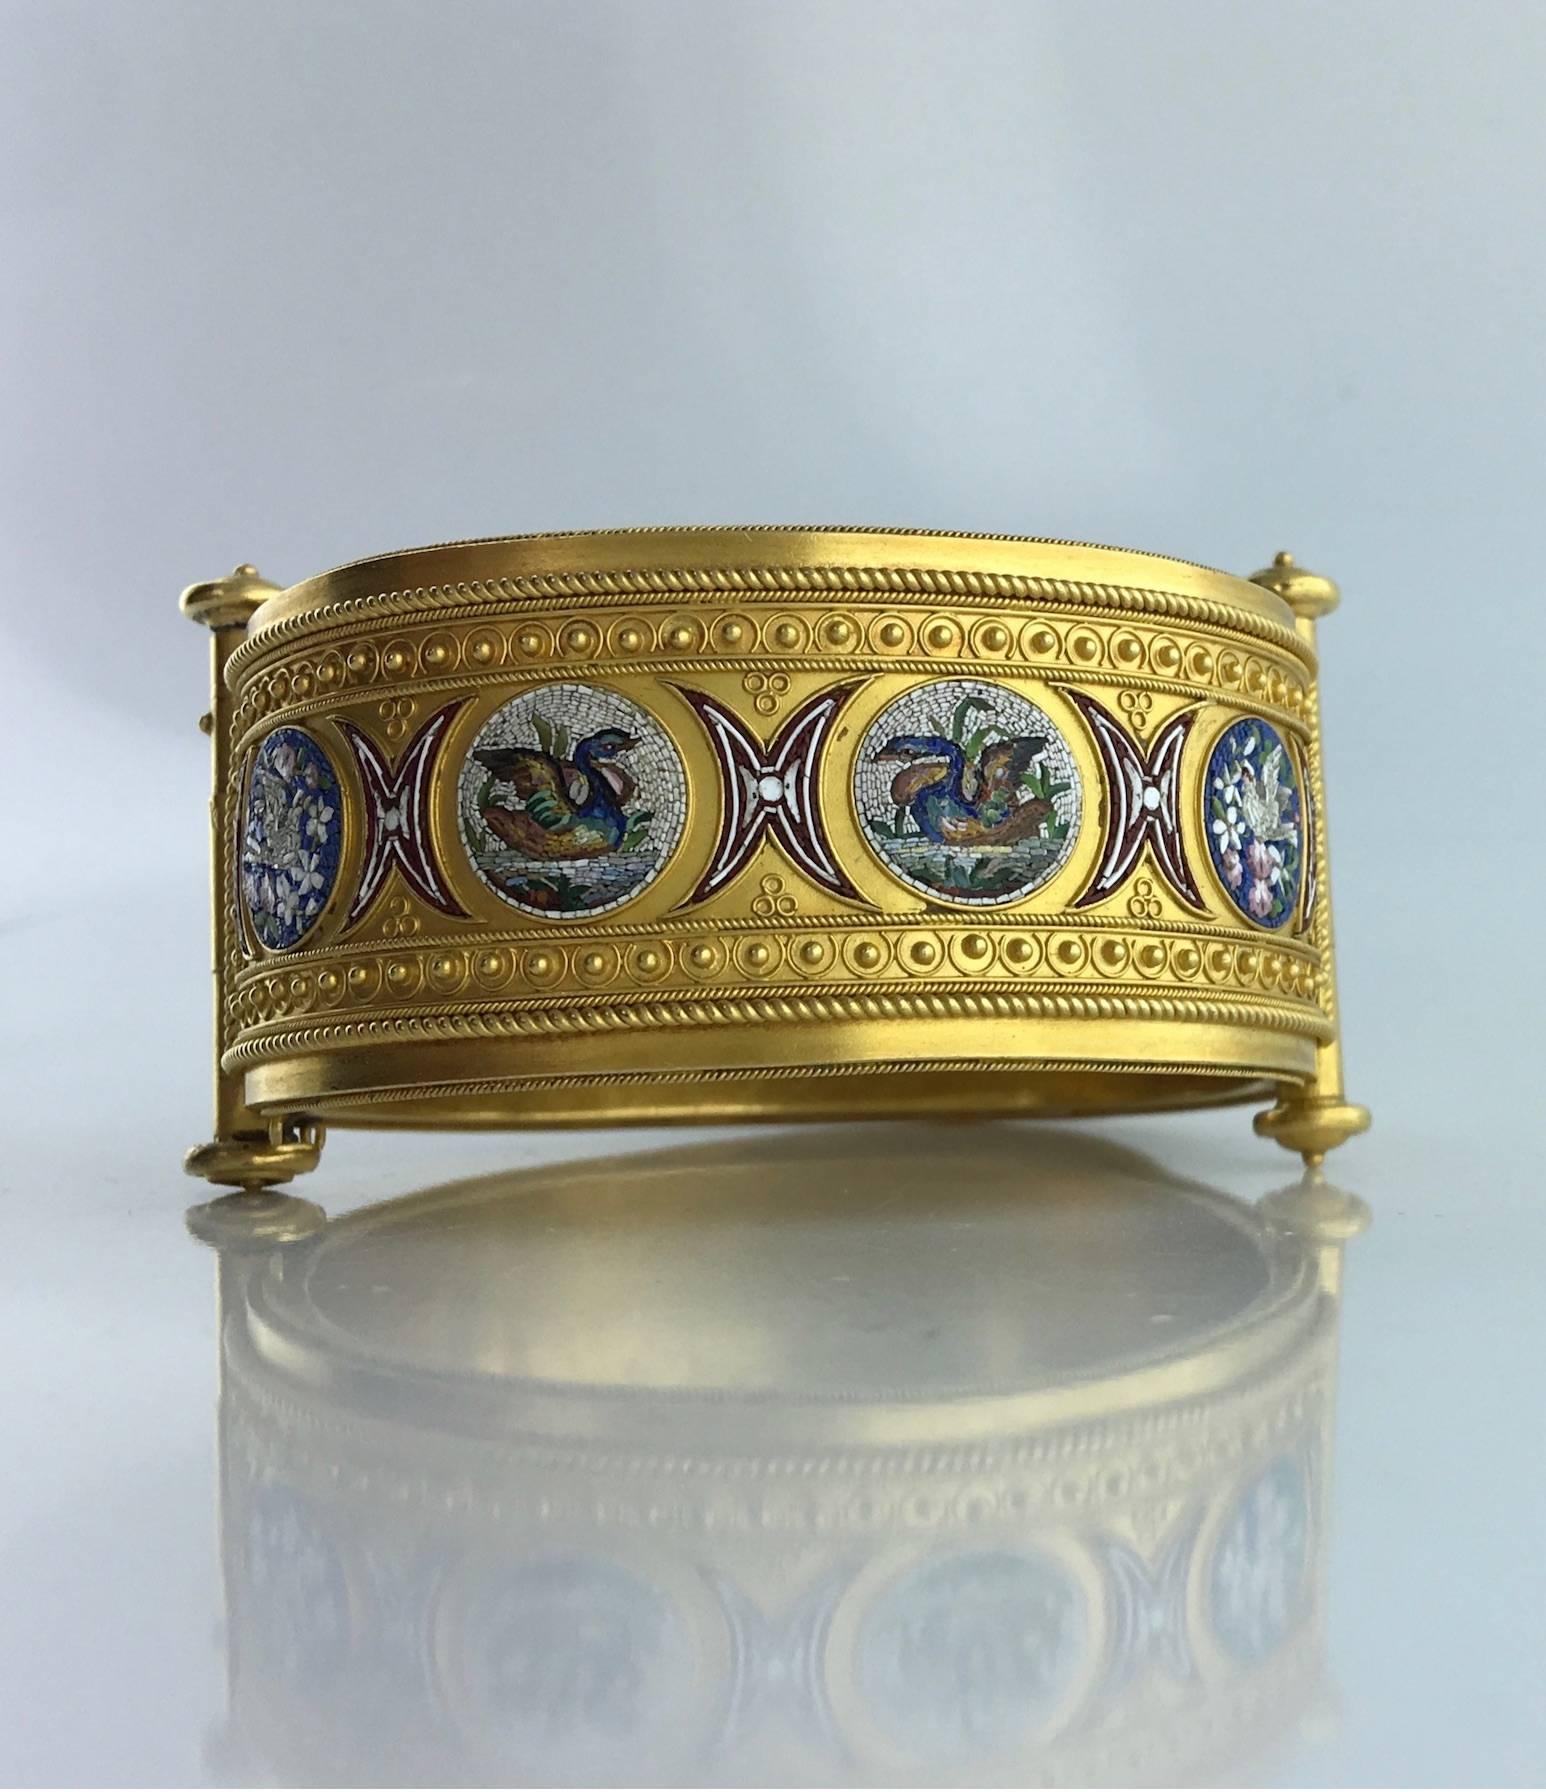 Yellow 18k gold 750 bangle punctuated by four micromosaic motifs, circa 1850.
Italian work (Rome).

Gross weight: 56.20 grams.